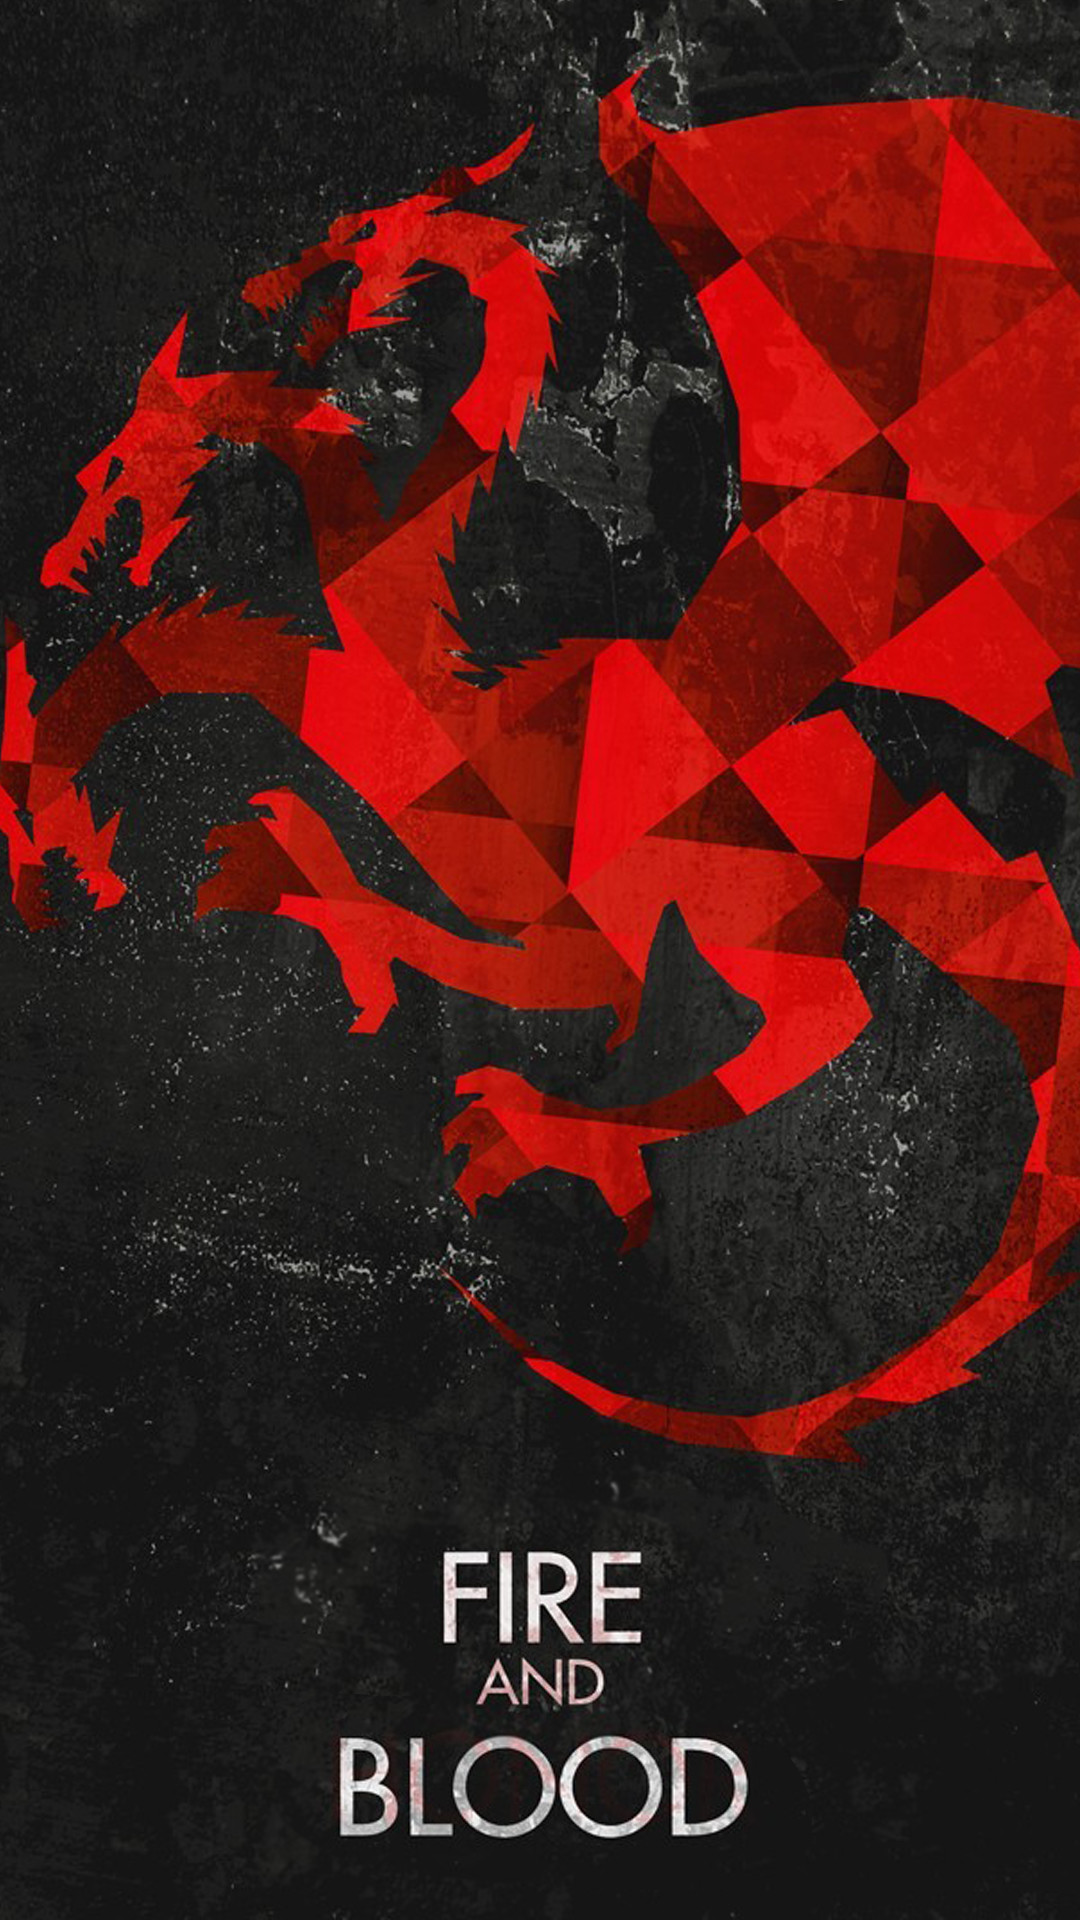 1080x1920 Fire And Blood Game Of Thrones House Targaryen Dragons Android Wallpaper.jpg  (1080Ã